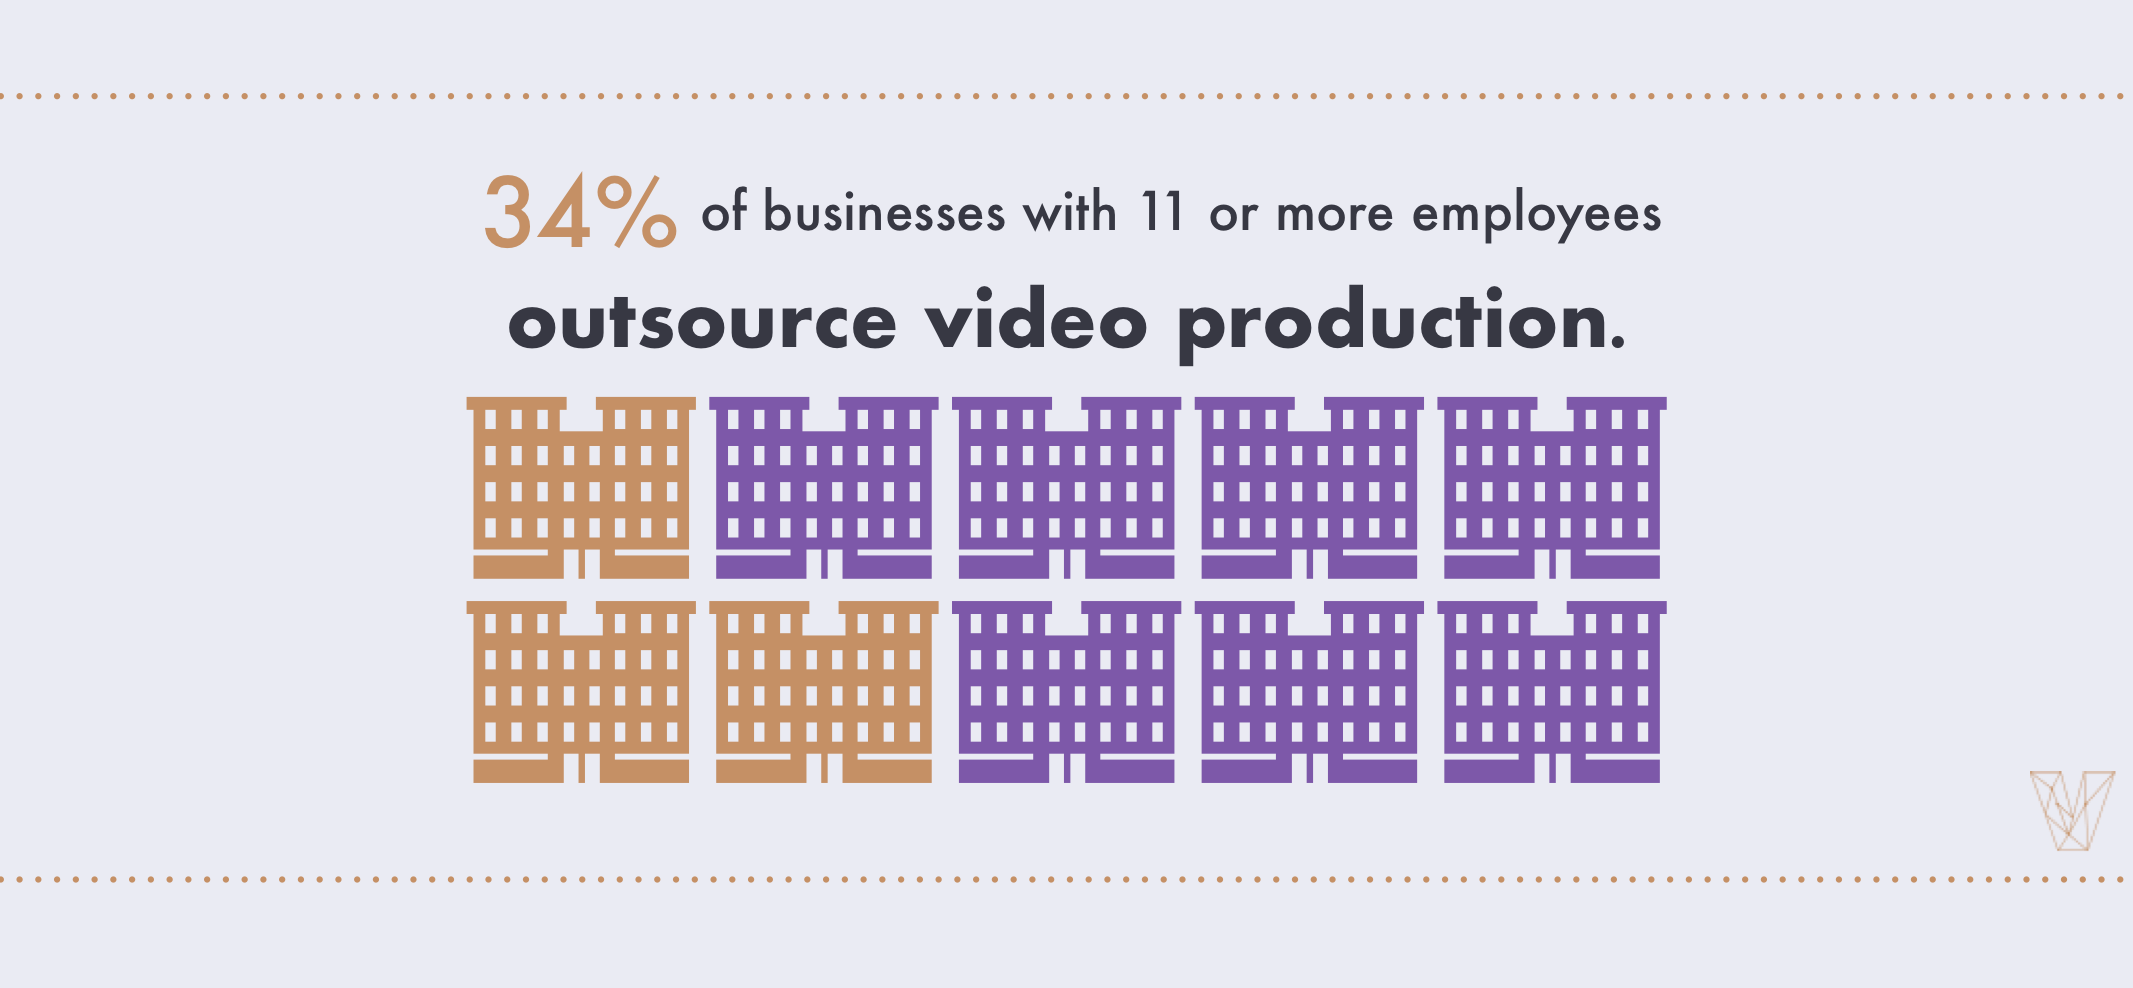 34% of businesses with 11 or more employees outsource video production